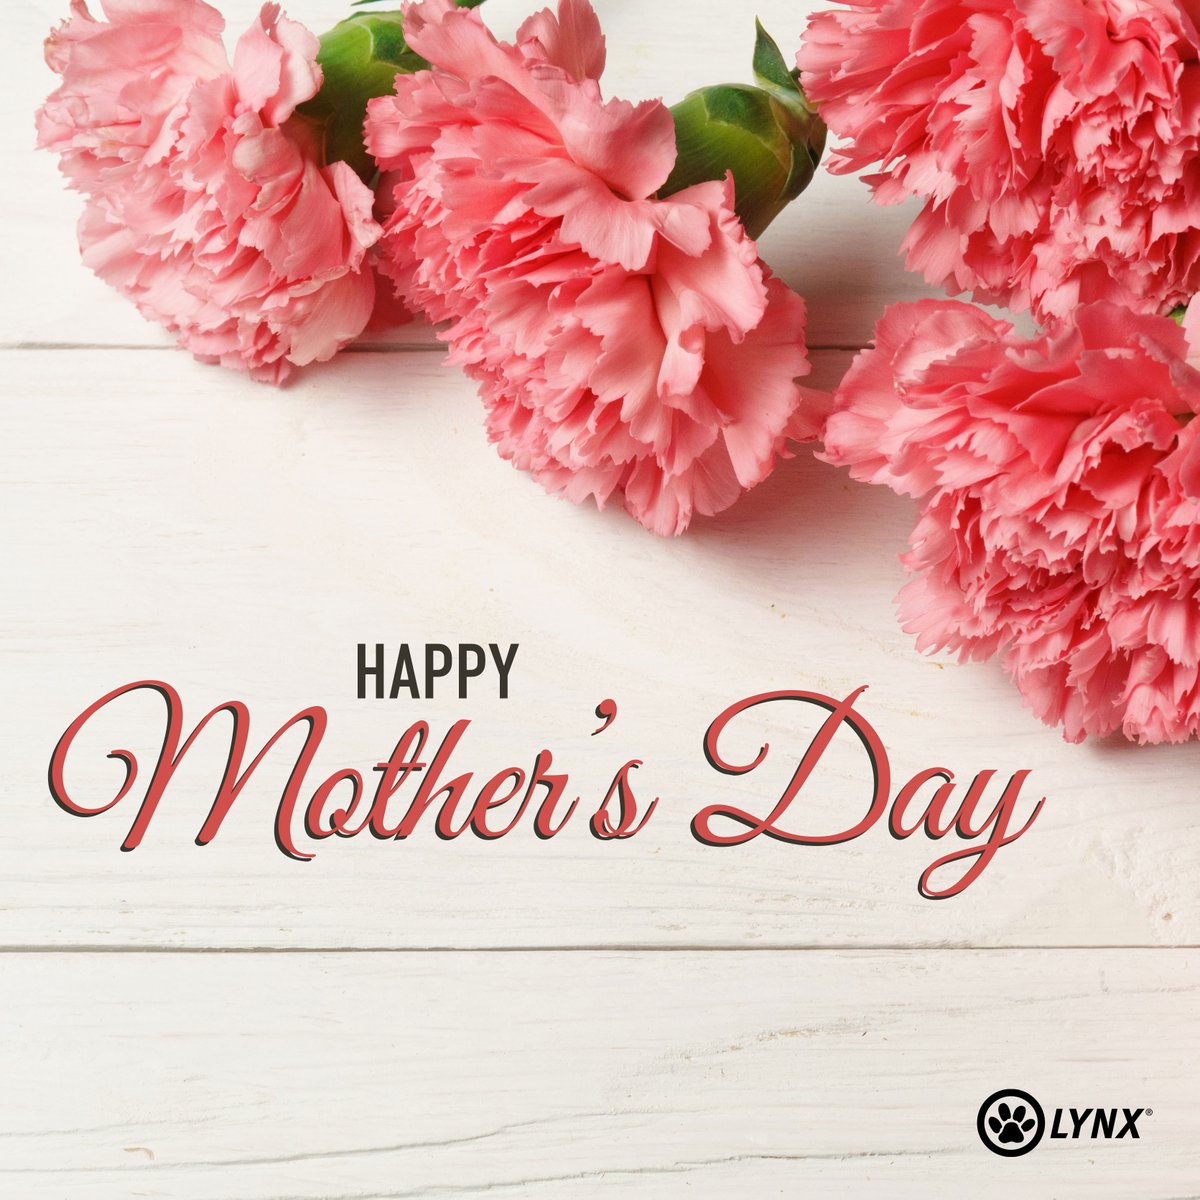 Happy Mother's Day to all the moms out there! Let's celebrate the women who inspire us every day. Whether it's your mom, grandmother, aunt or any mother figure in your life, let's show them some extra love and appreciation.